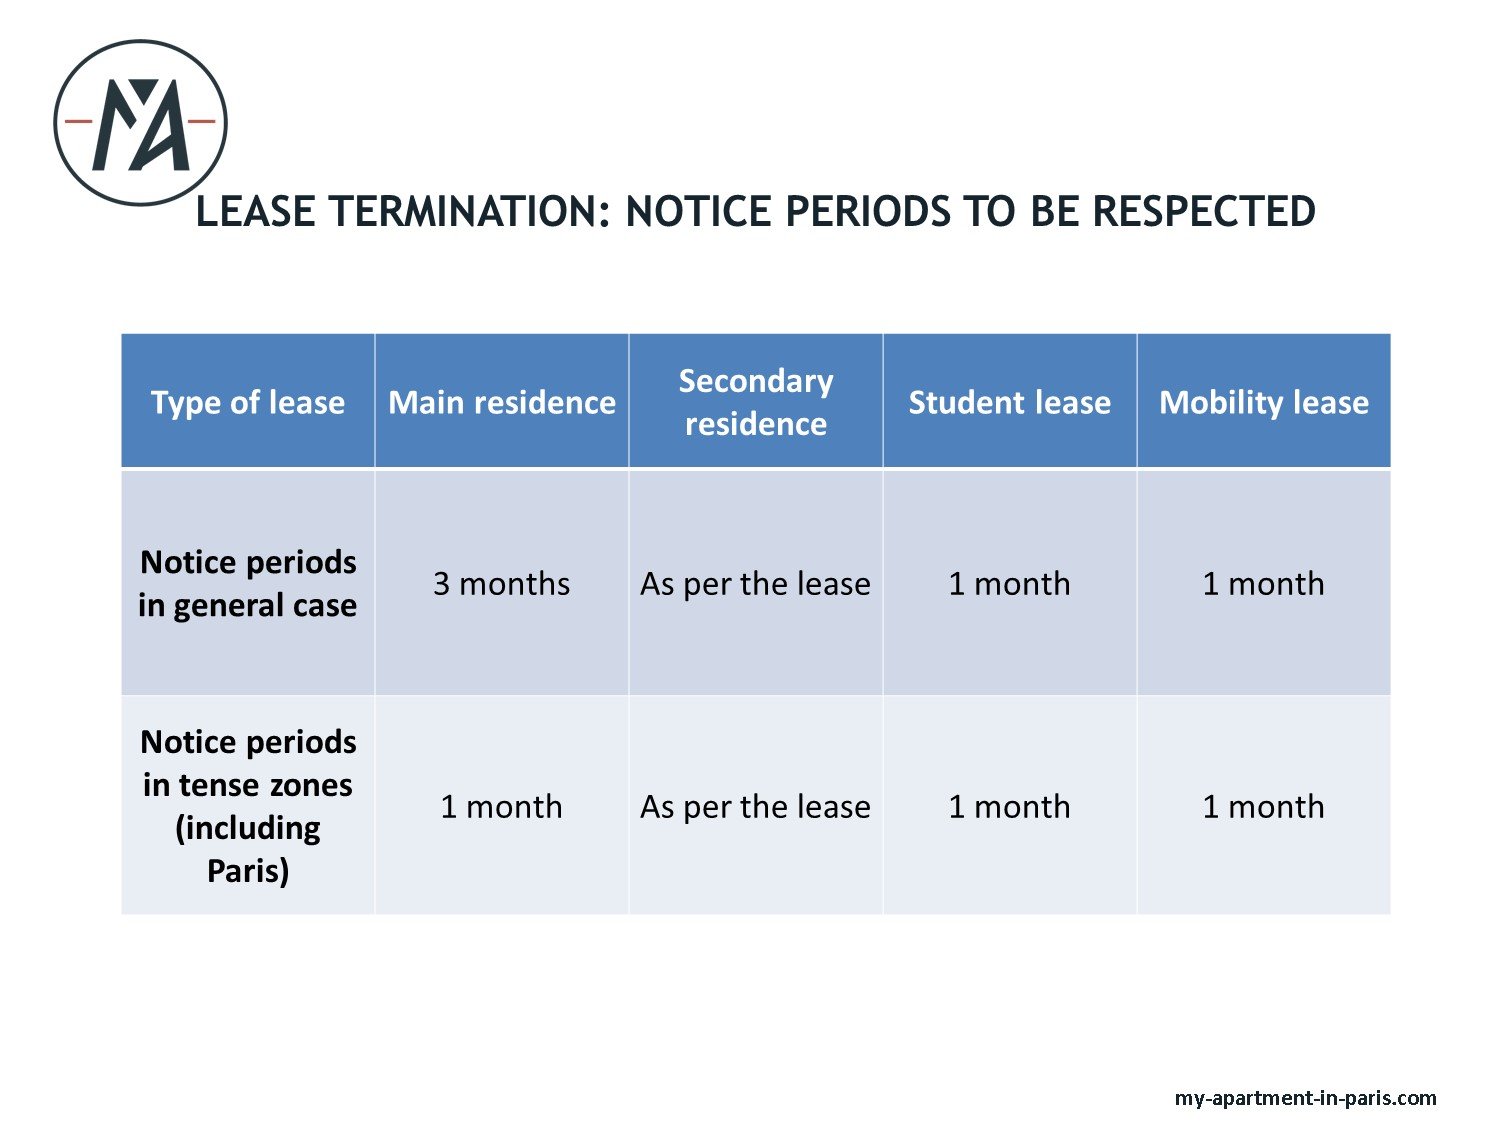 Lease termination: notice periods to be respected